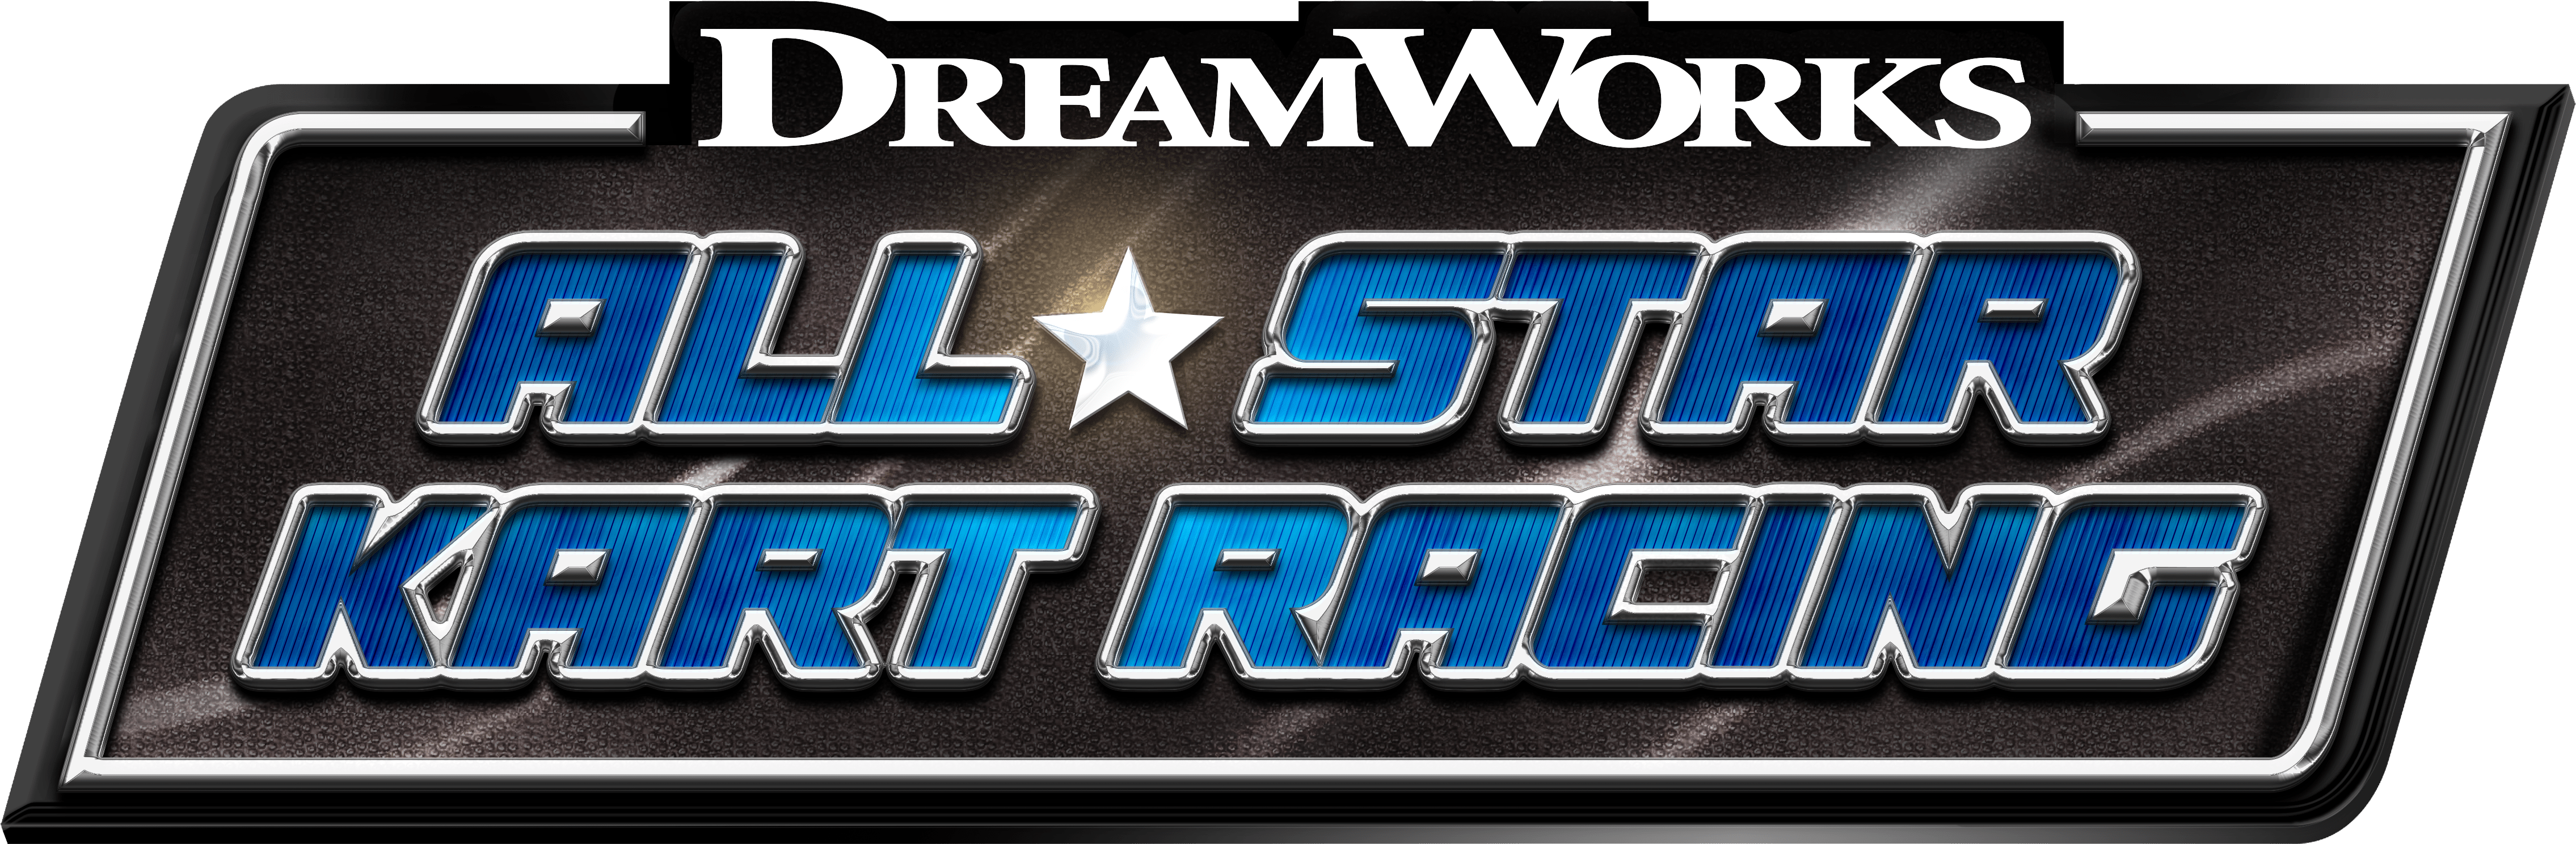 DreamWorks All-Star Kart Racing for Nintendo Switch - Nintendo Official Site